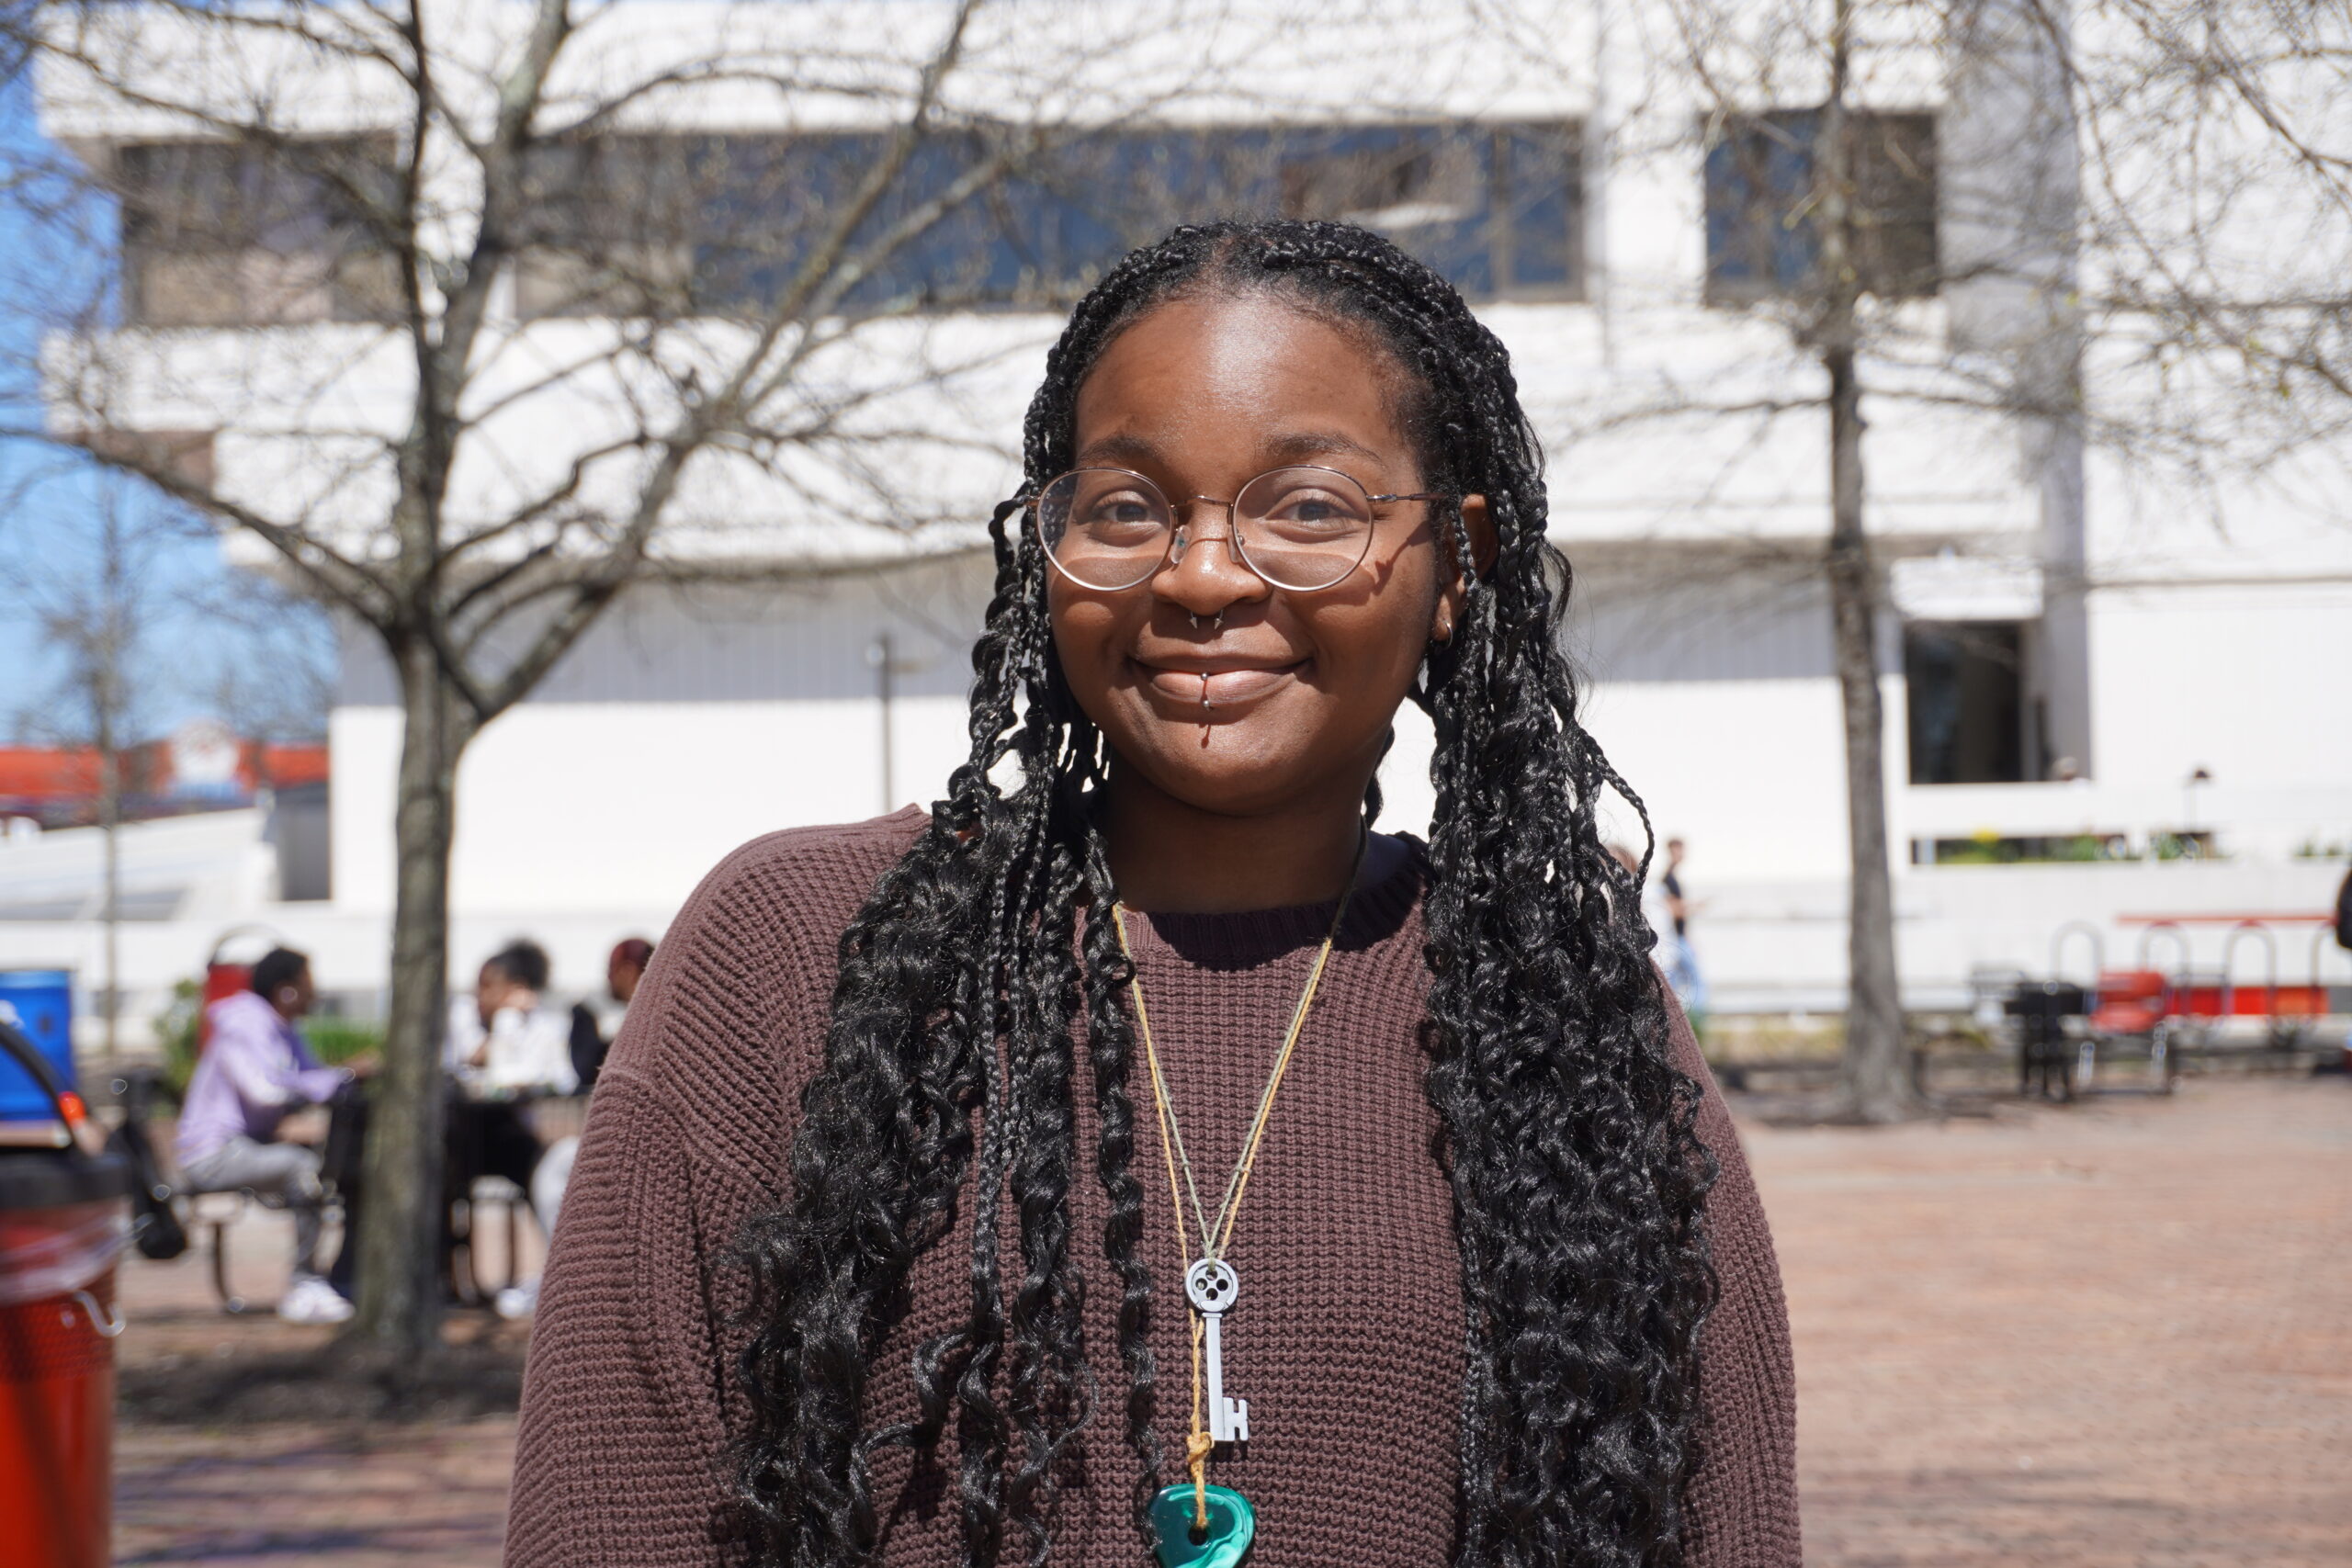 Sophomore psychology/English major Azhane Simpson cites out-of-touch lawmakers and a lack of open-mindedness among Americans as reasons many feel political apathy. Jordan Reed | The Montclarion